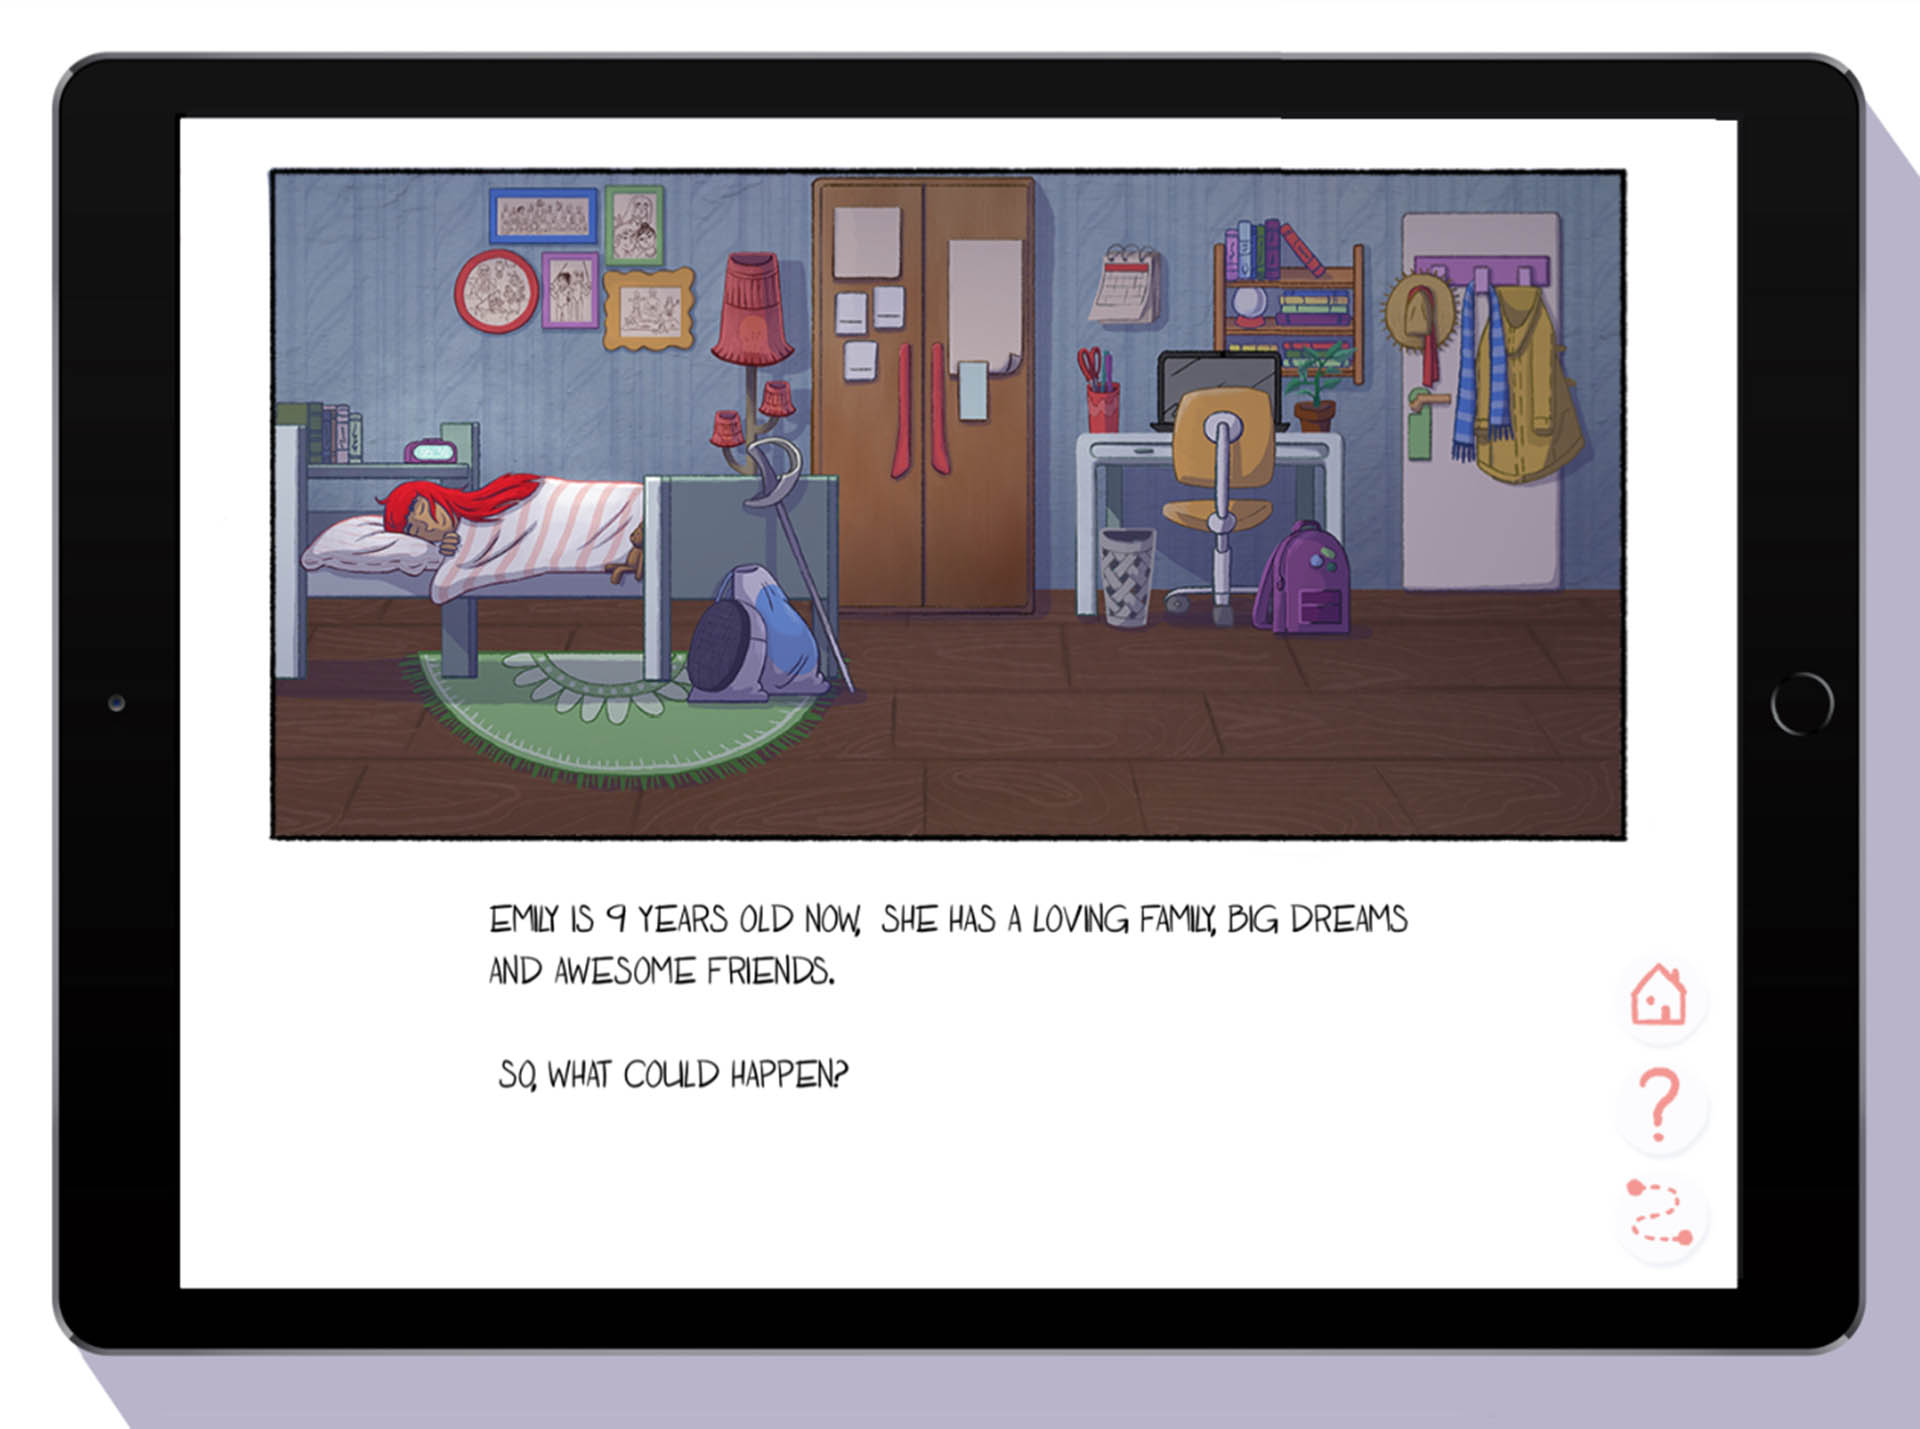 Mock-up of the interactive graphic novel with navigation icons